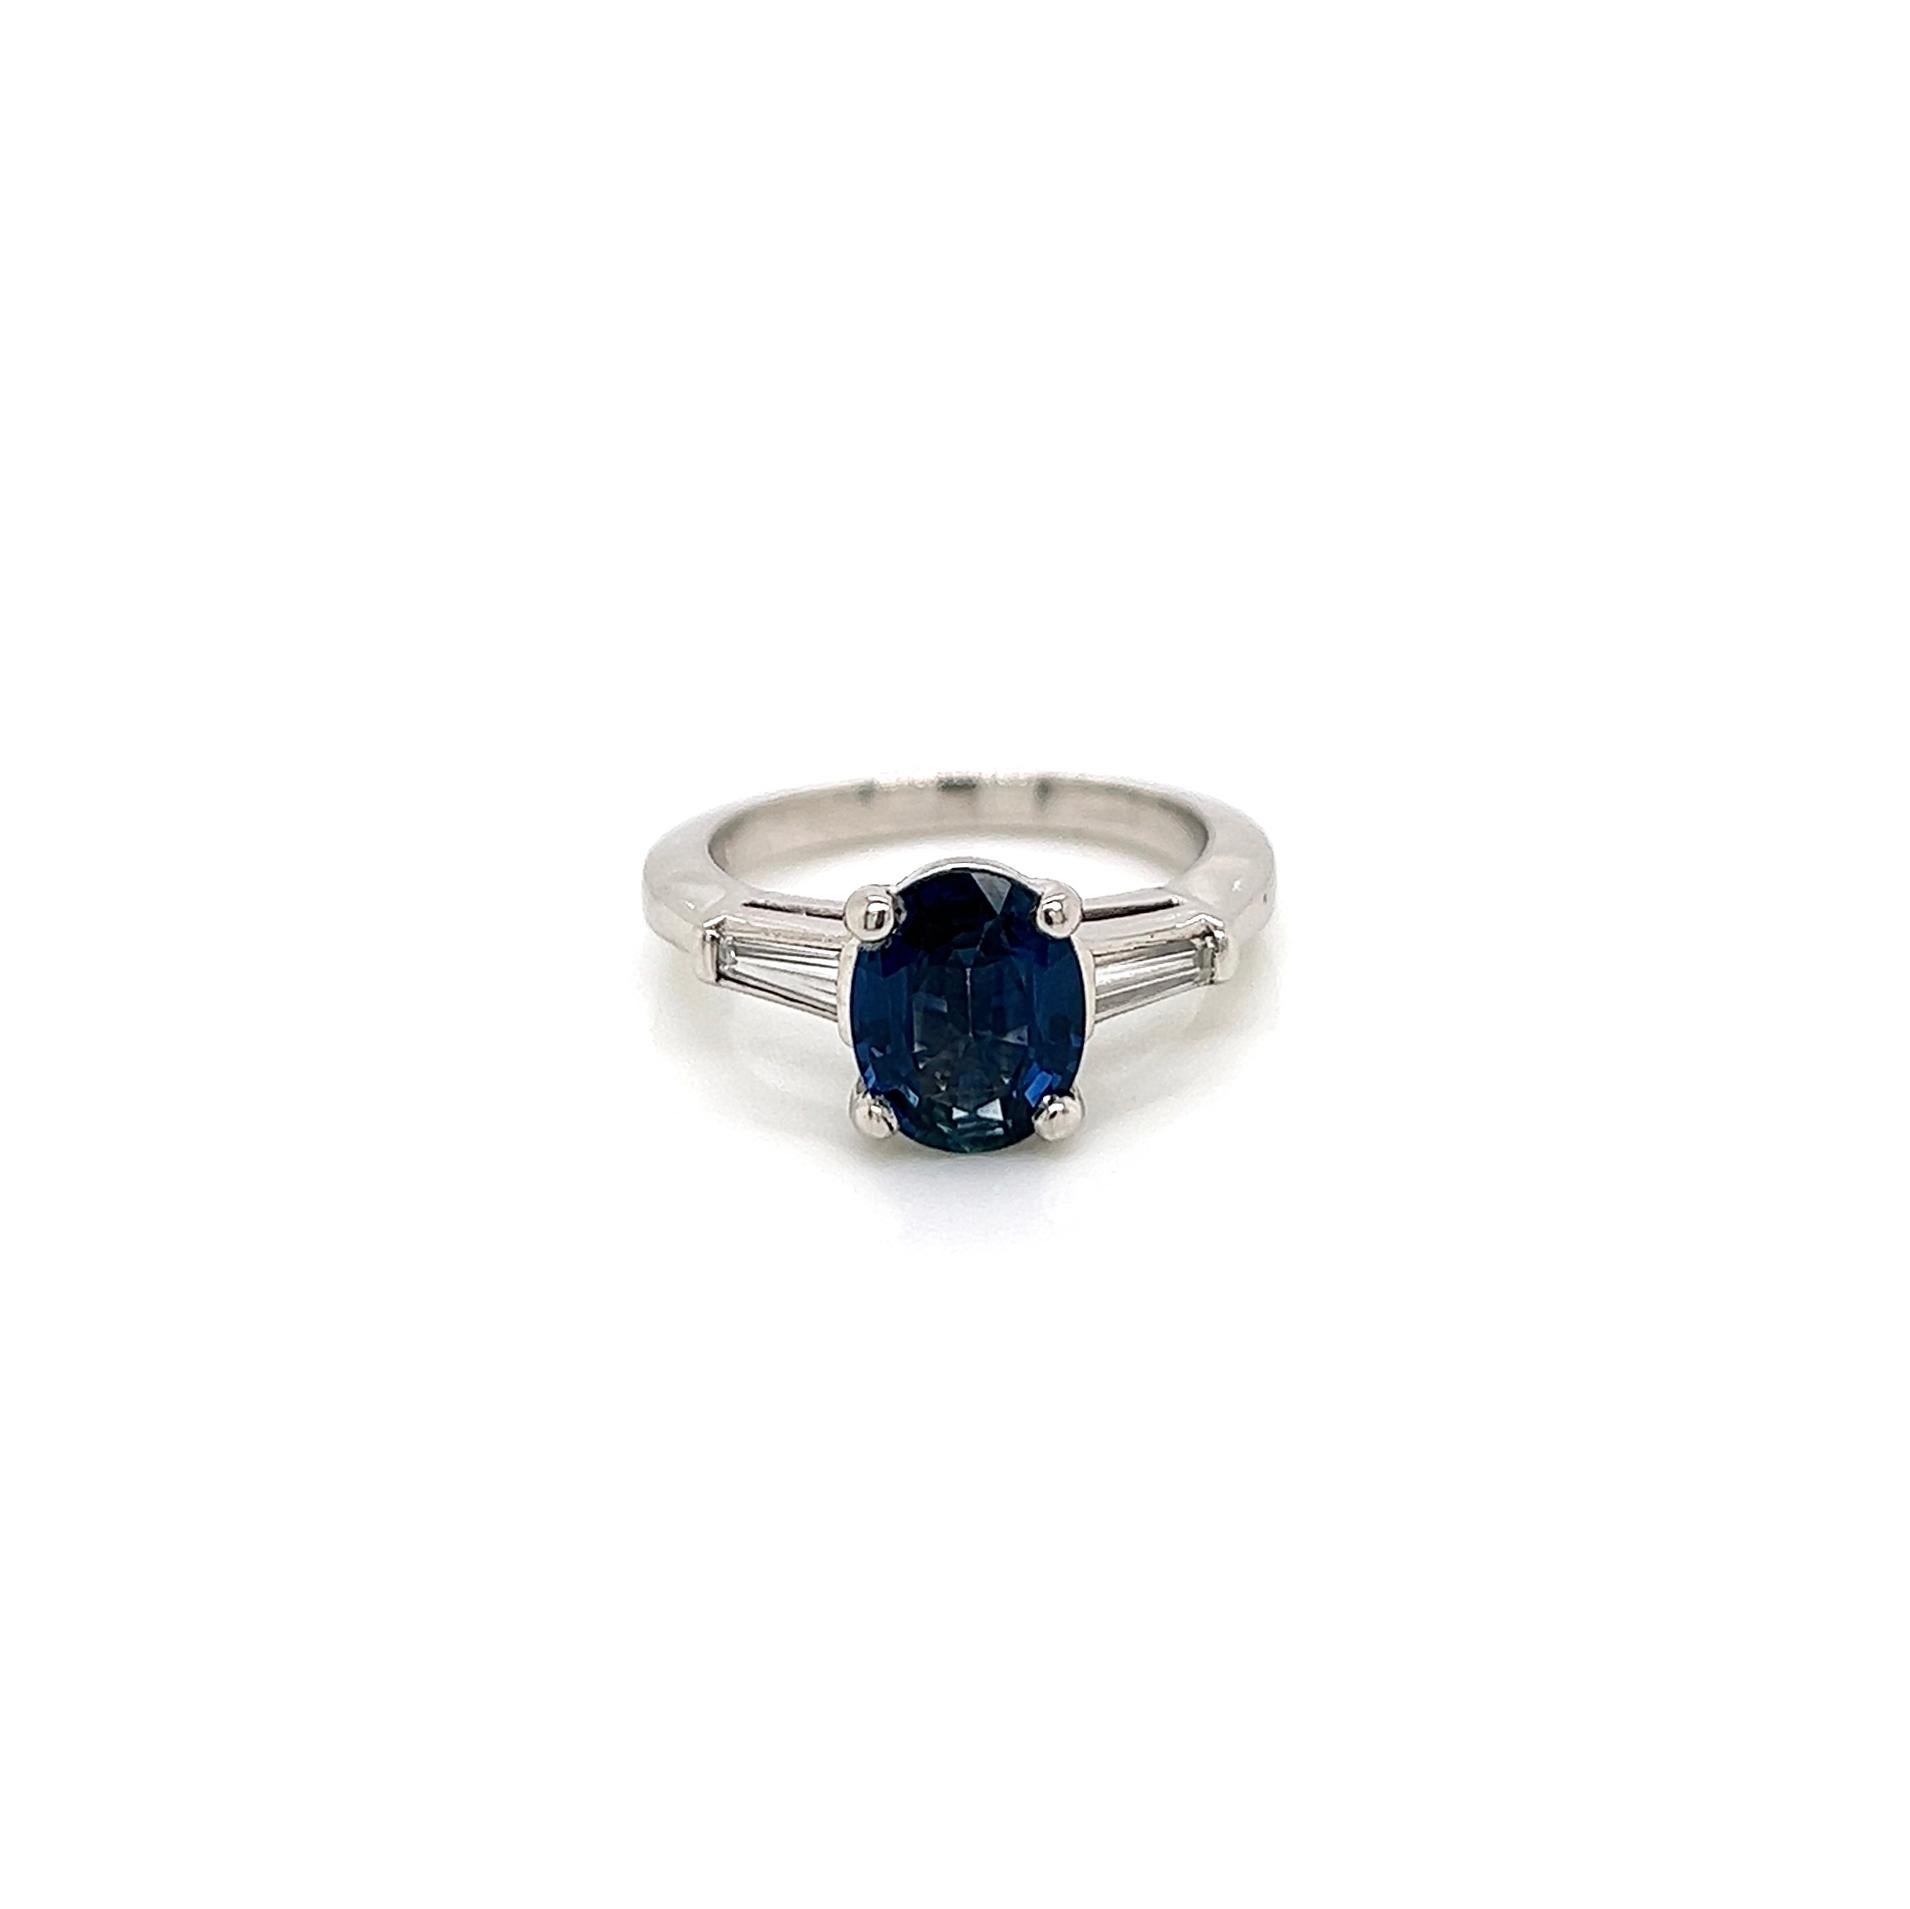 2.26 Total Carat Sapphire Diamond Engagement Ring

-Metal Type: Platinum
-1.96 Carat Oval Cut Blue Sapphire, GIA Certified 
-0.30 Carat Baguette Side Diamonds 
-Size 5.5

Made in New York City